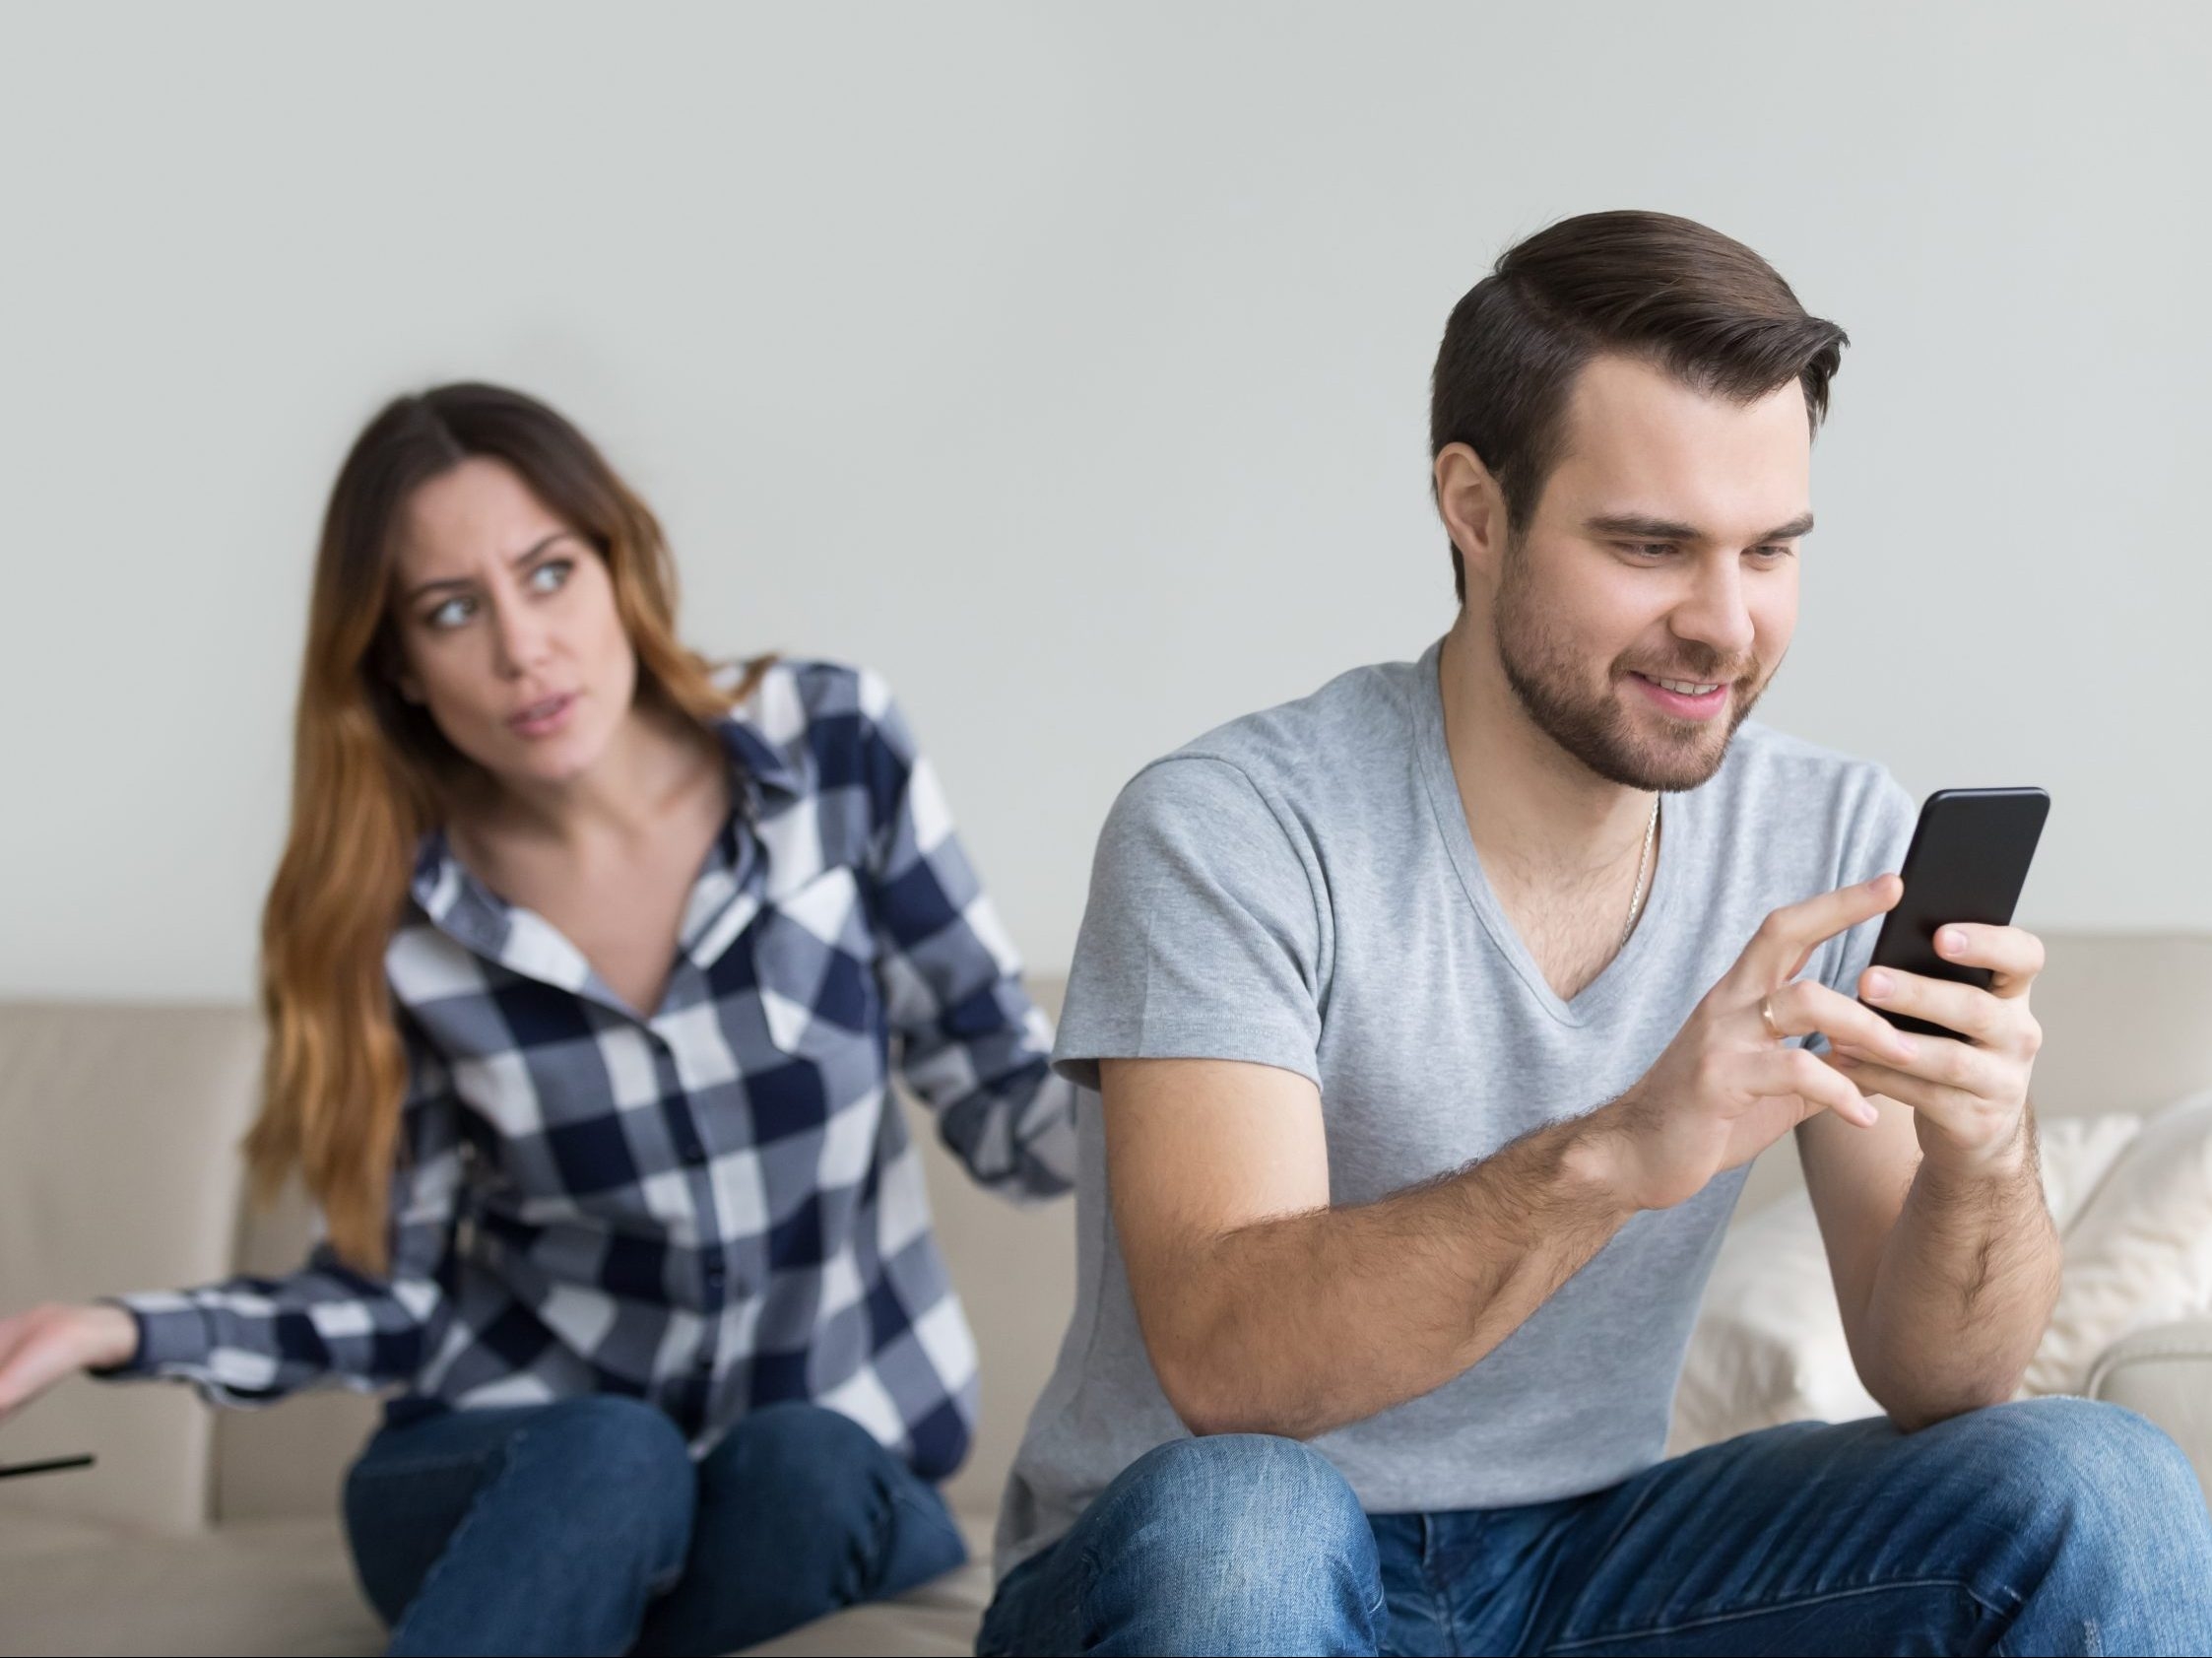 ASK AMY: Text messages interfere with couple’s trust – World news